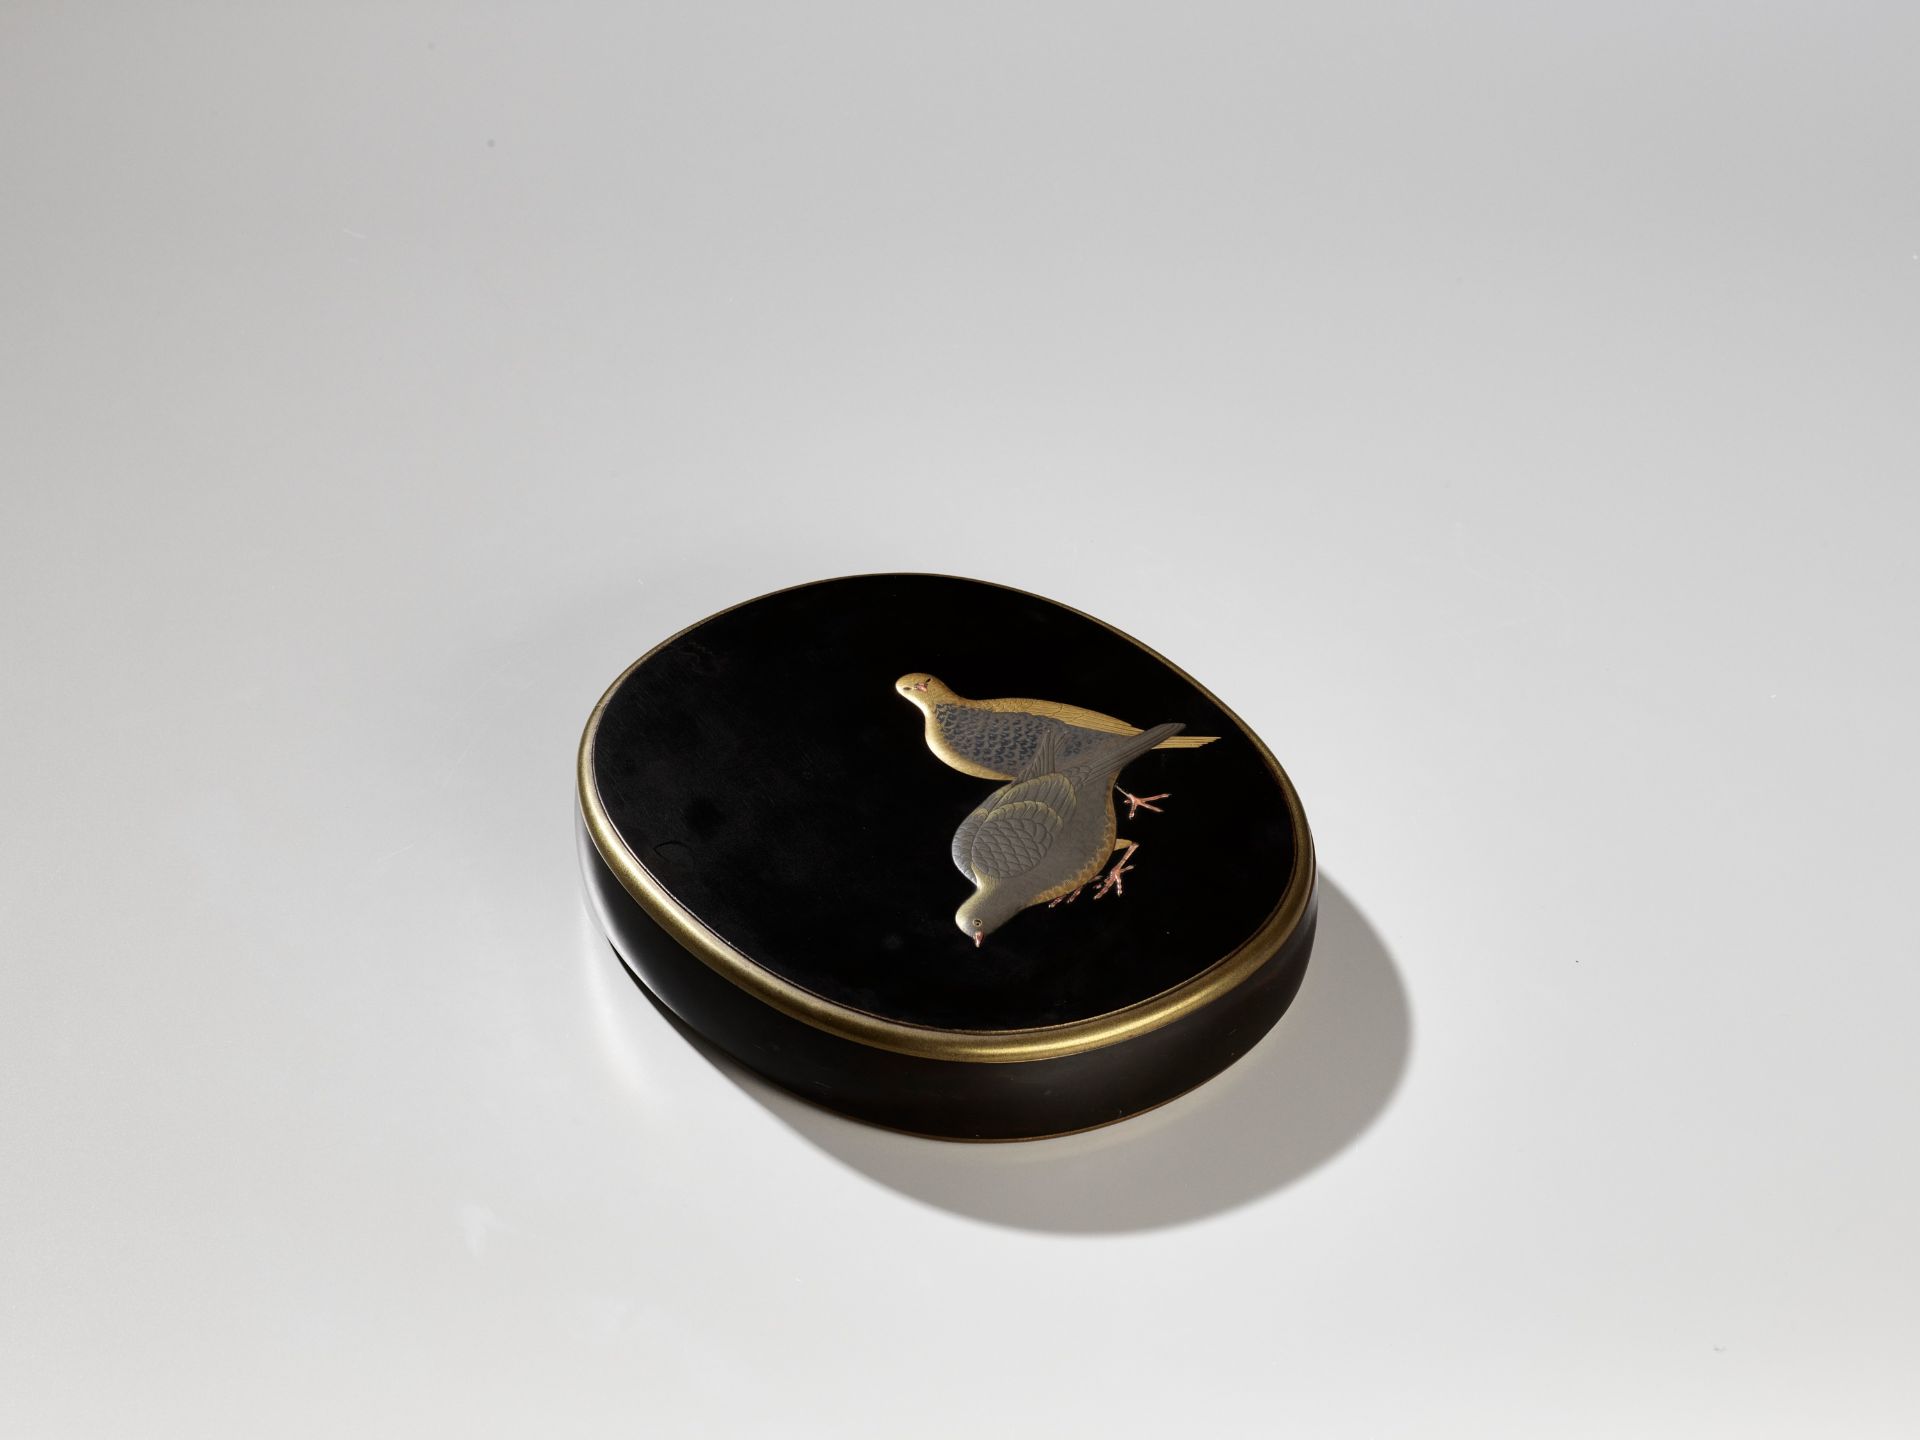 A FINE LACQUER SUZURIBAKO DEPICTING A PAIR OF PIGEONS - Image 5 of 11